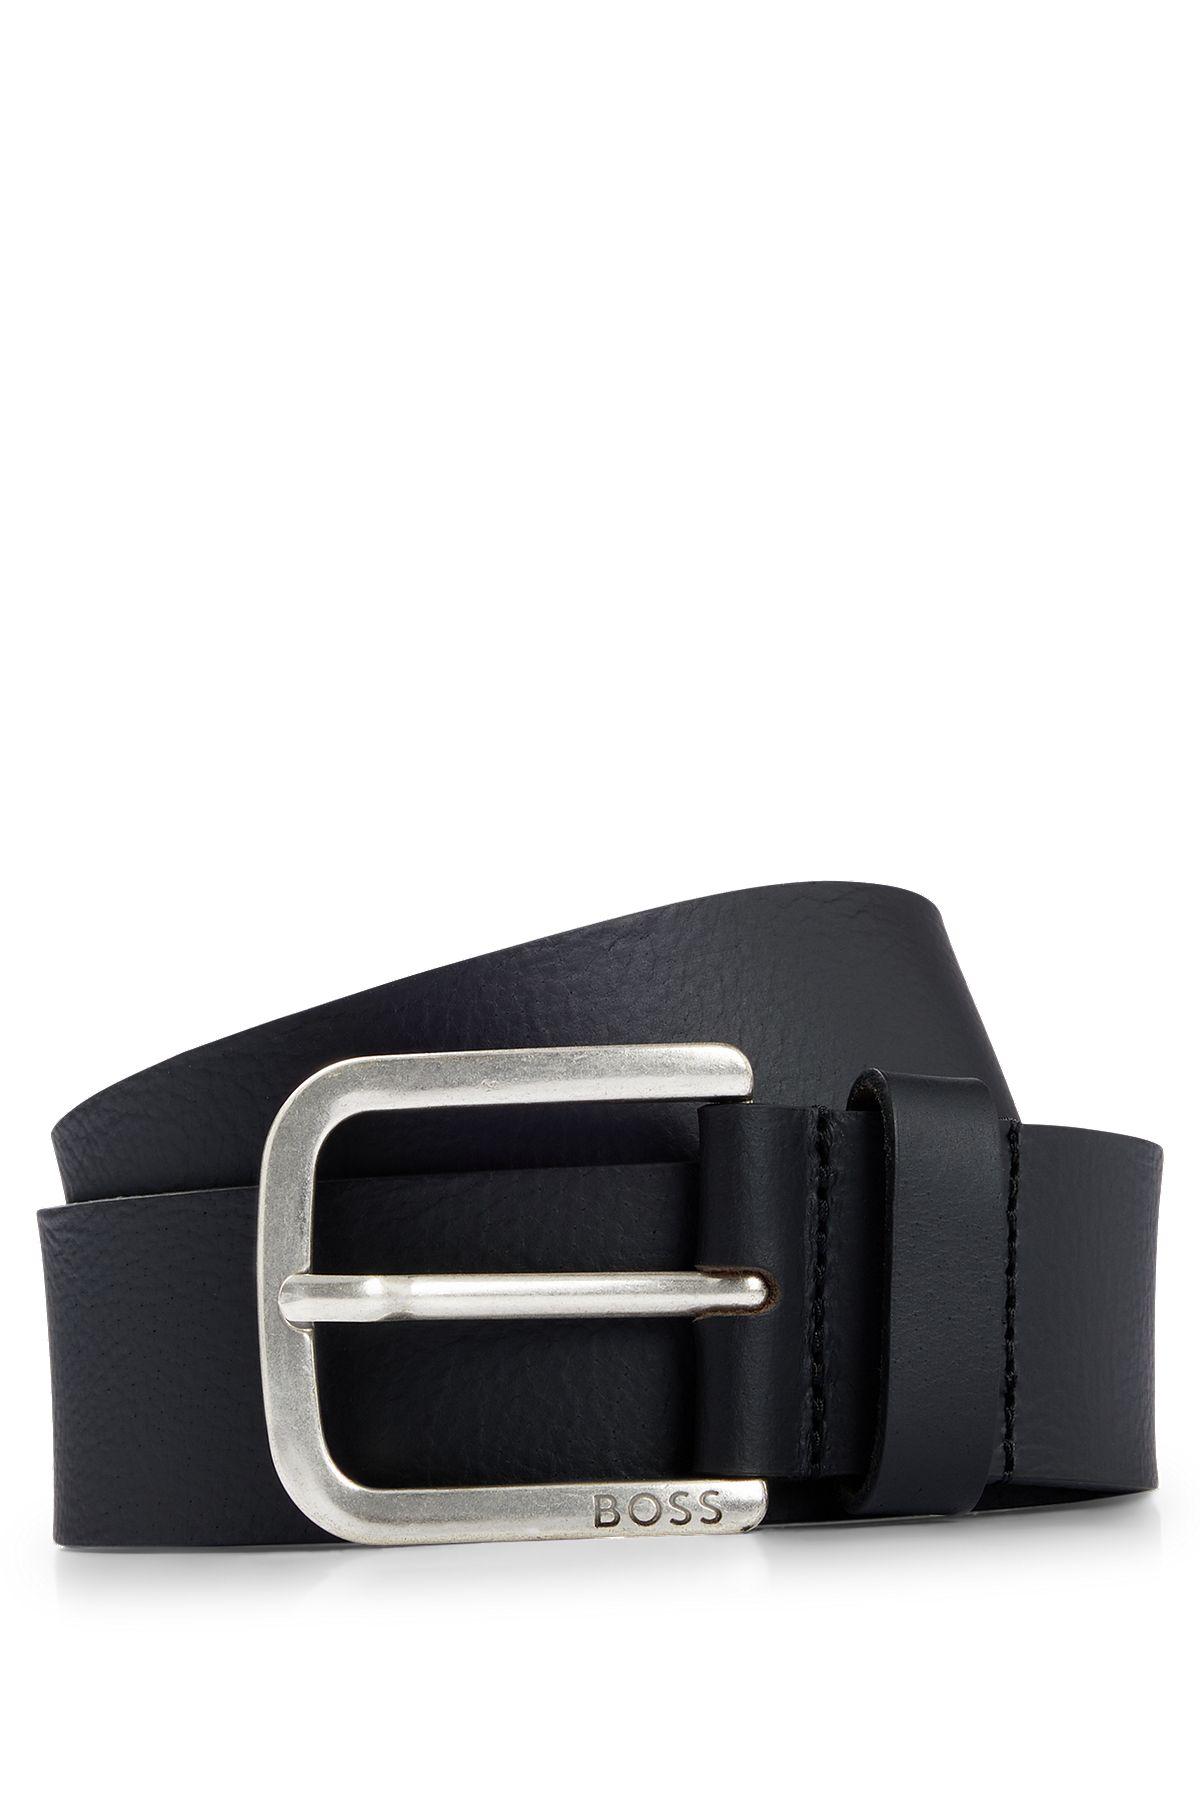 Buffalo-leather belt with branded pin buckle, Black